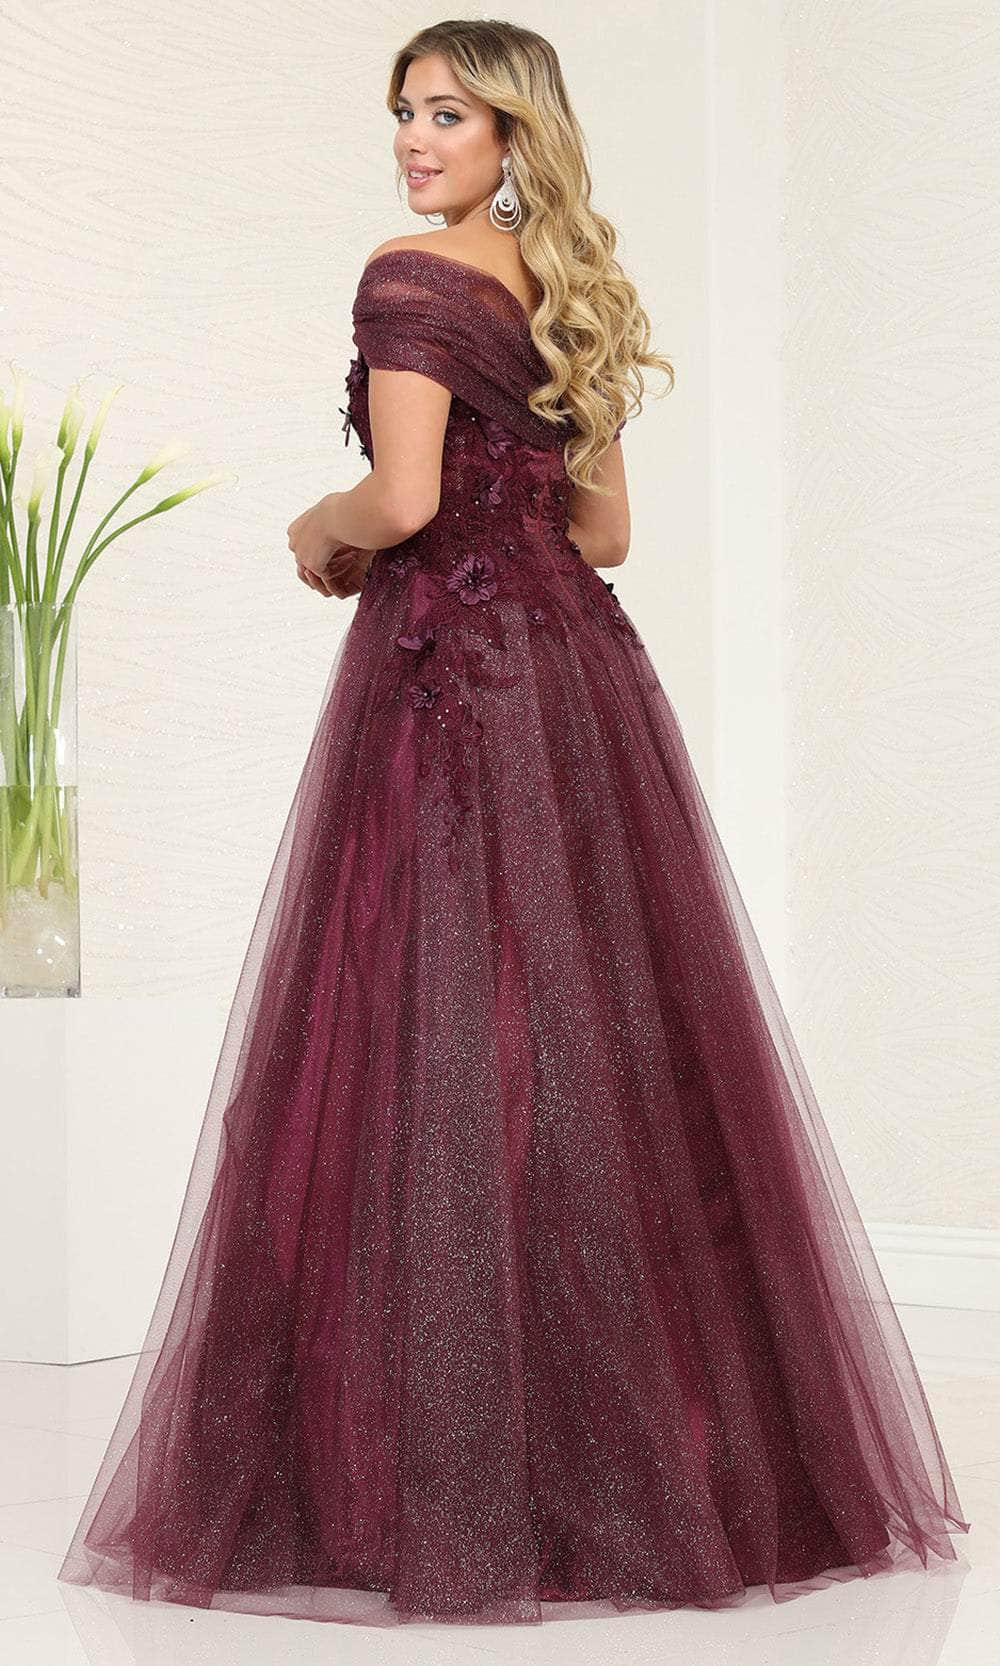 May Queen RQ8109 - Sweetheart A-Line Prom Gown Prom Dresses